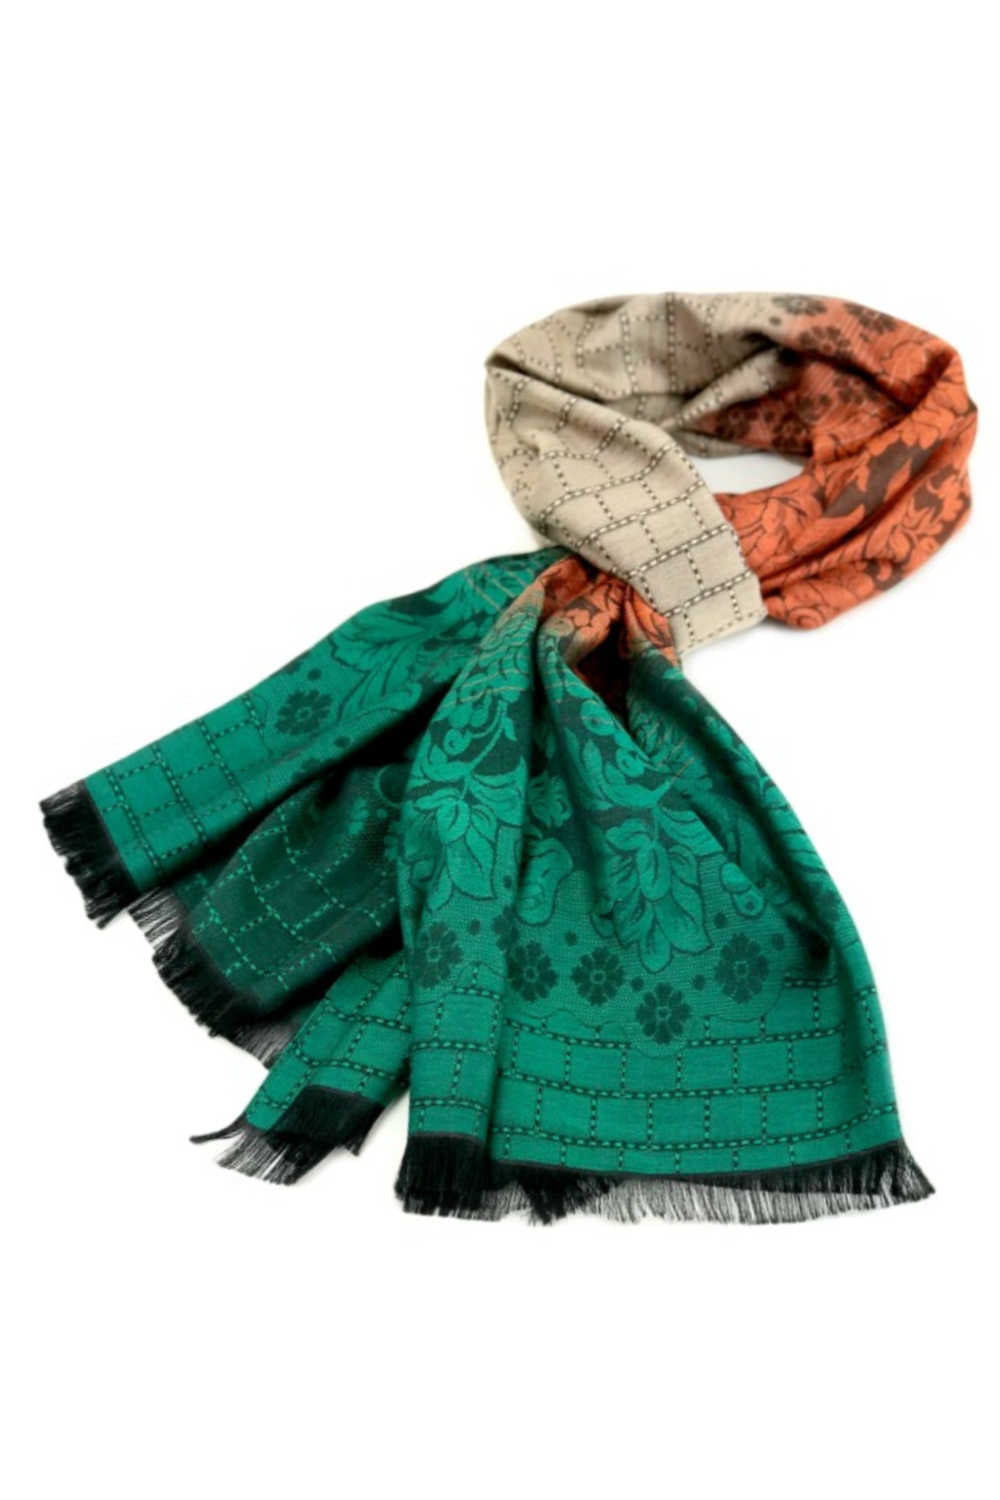 Beads of Paradise Ensemble 16: Thai 100% Raw Silk Forest Green Scarf with Laos Hilltribe Woven Heirloom Silk Patterned Shawl - Each Item Sold Separately Forest Green